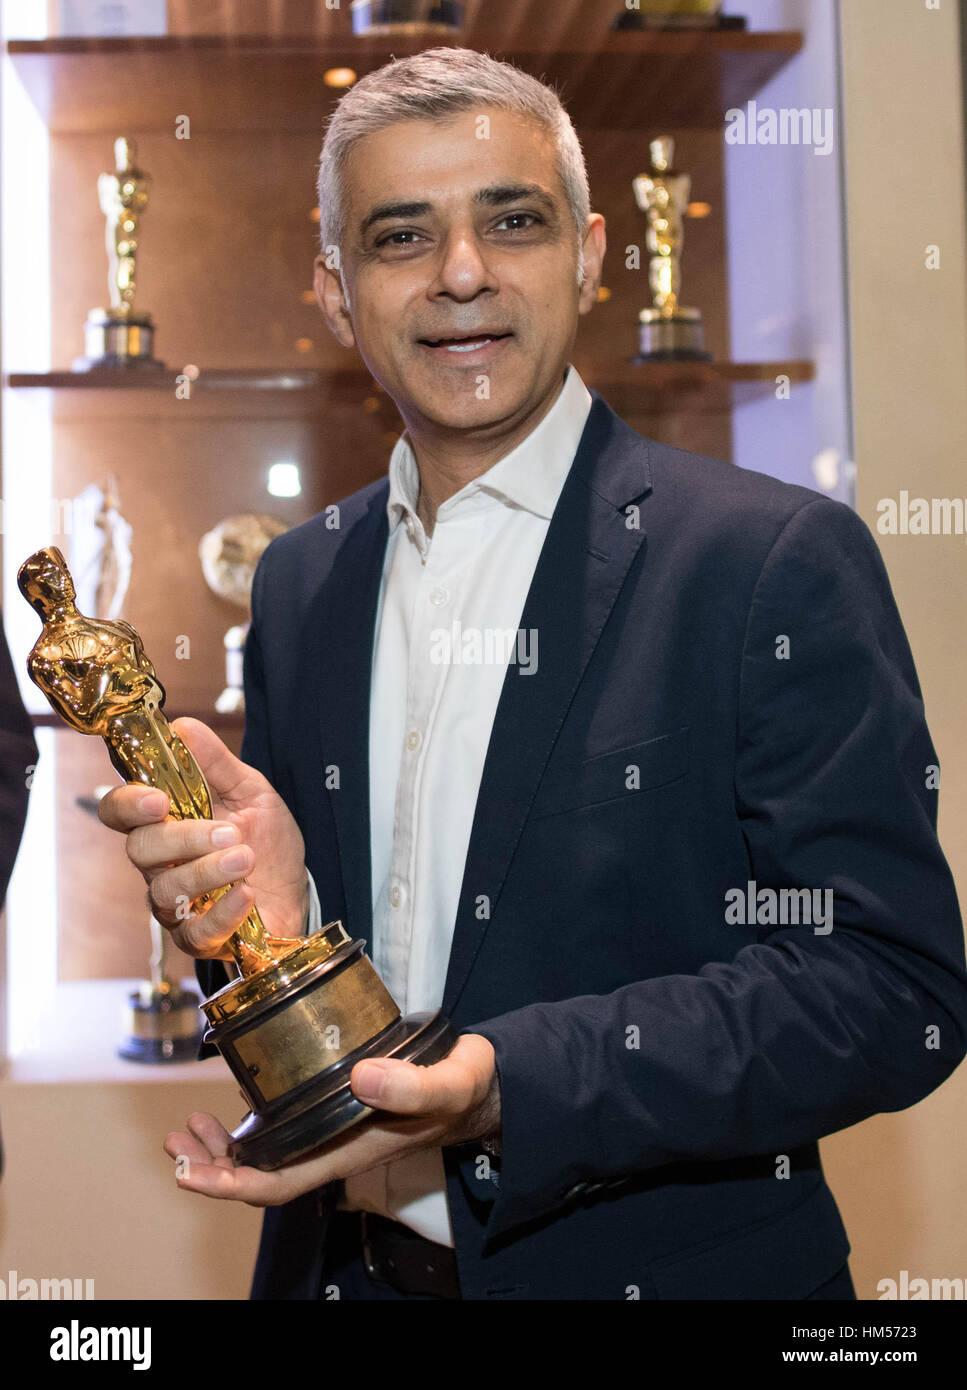 Mayor of London Sadiq Khan holds an 'Oscar' awarded to the special effects company Double Negative during a visit to the firm in central London, to discuss the capital's film industry. Stock Photo